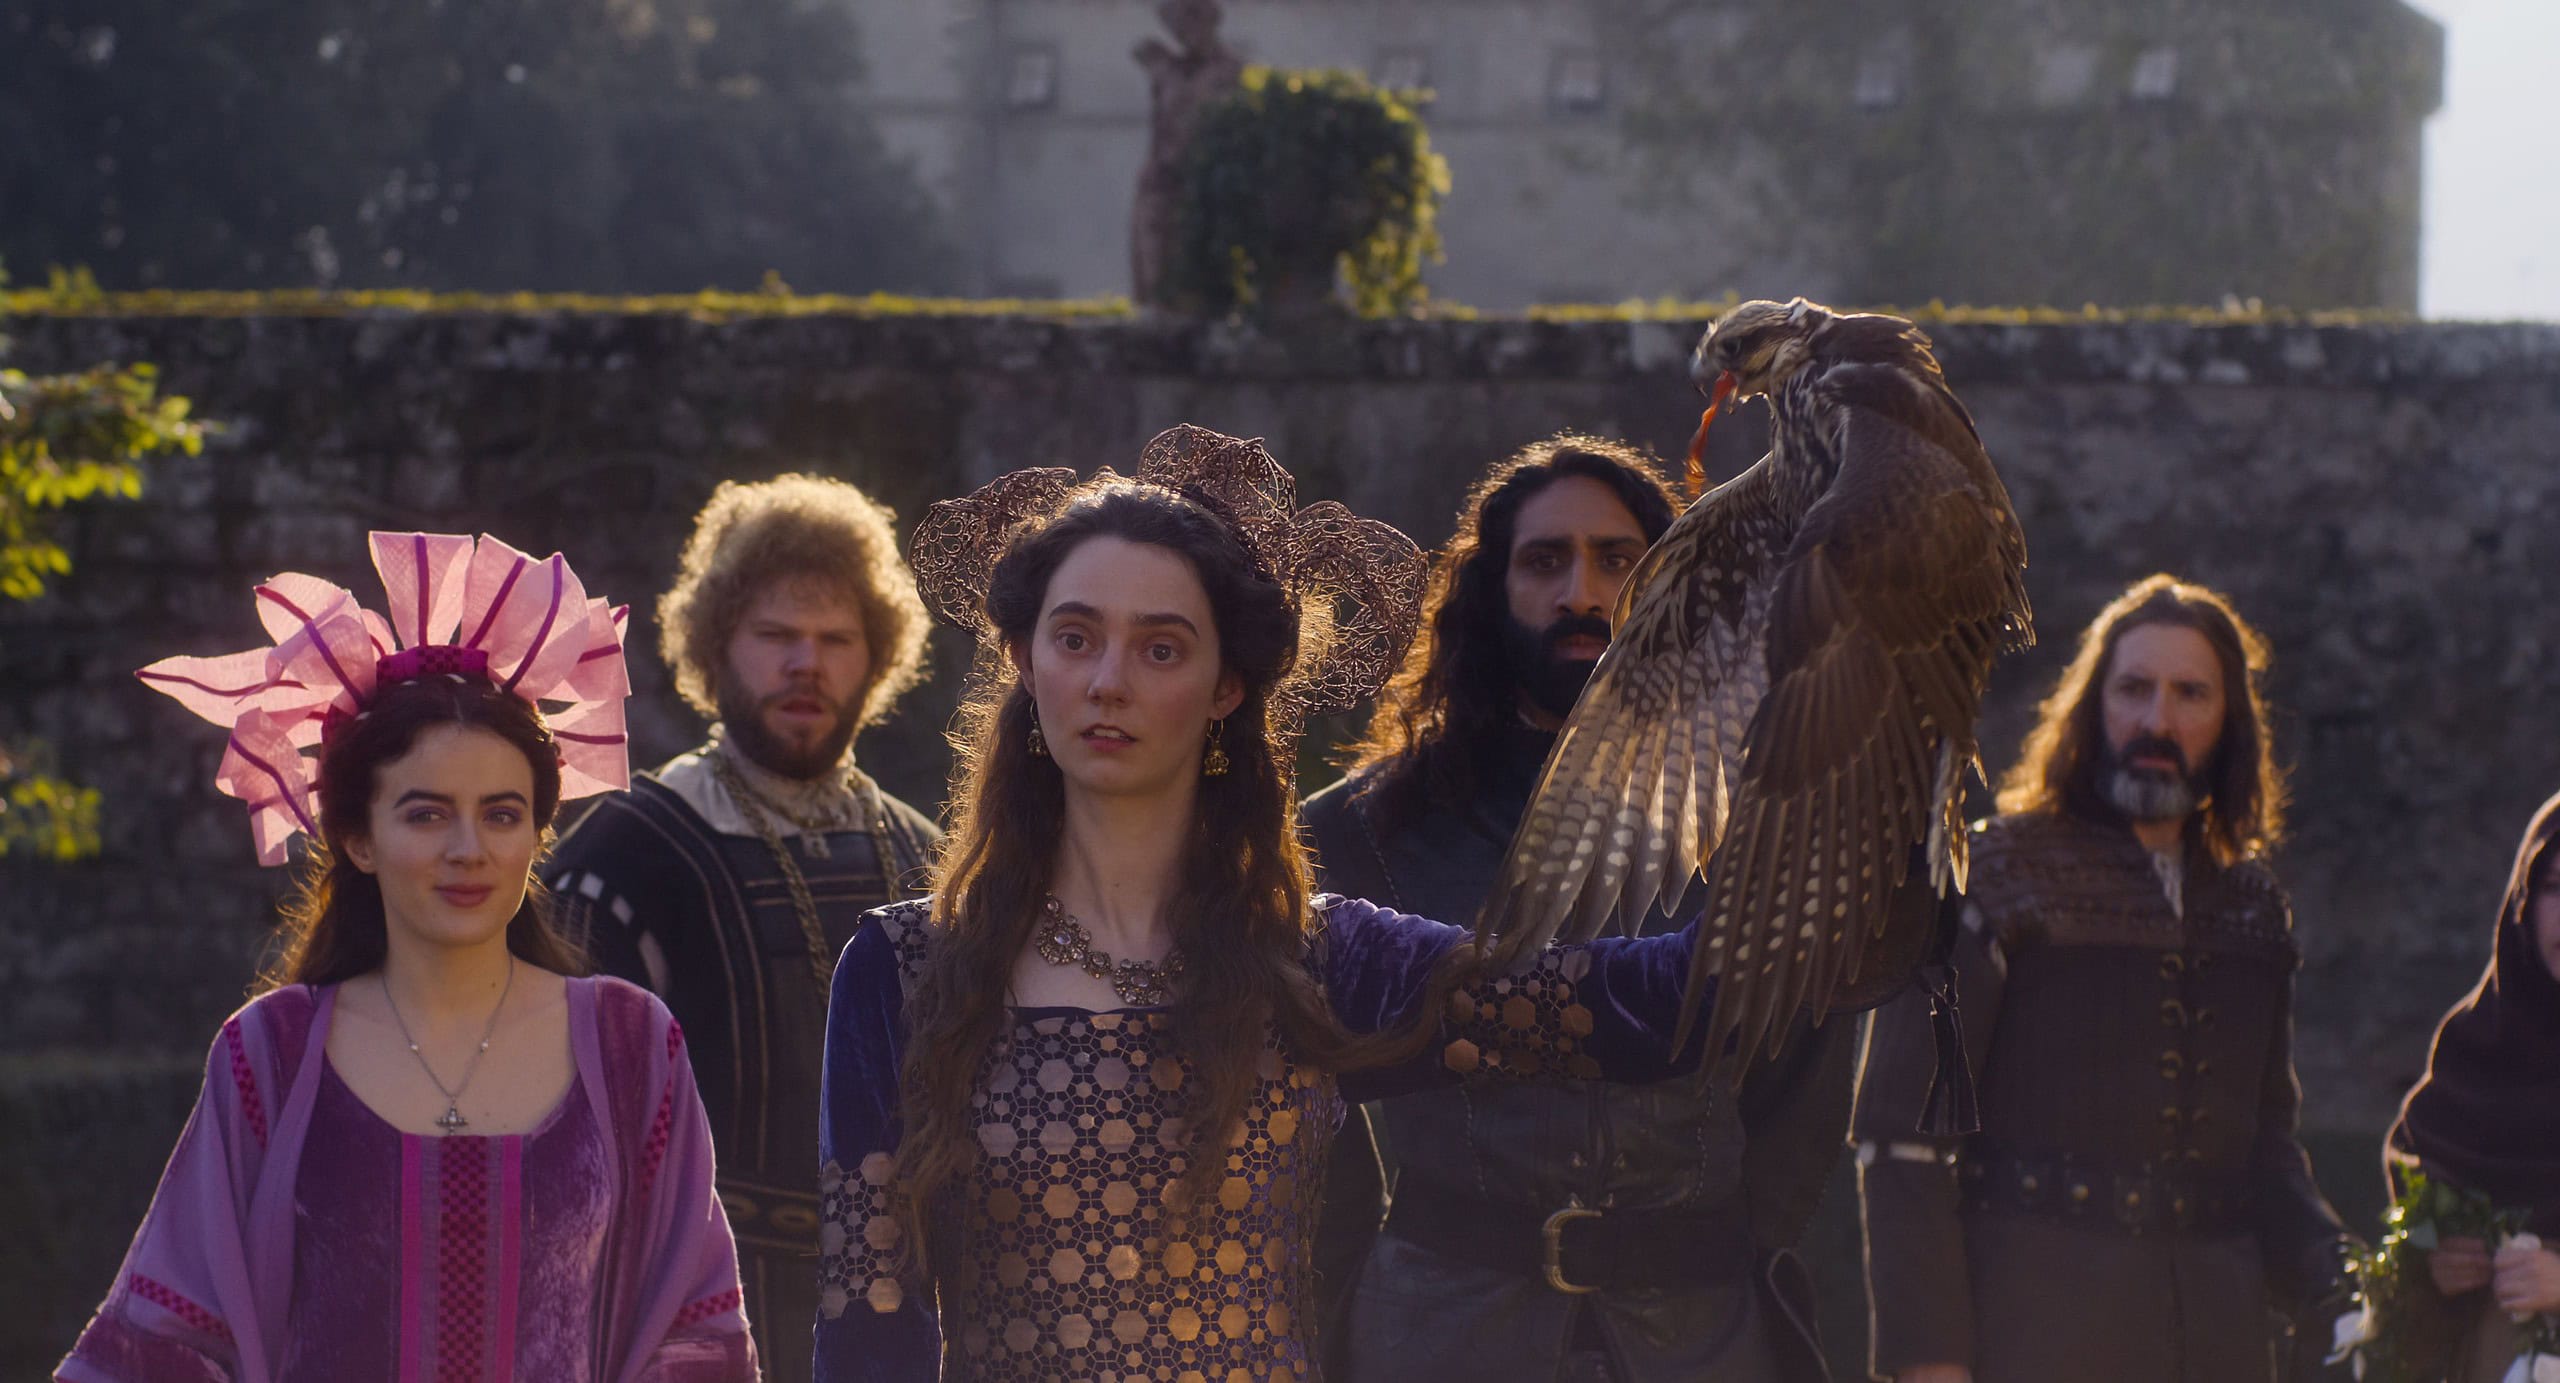 Netflix Drops Teaser for Dark Comedy Series Set in 14th Century Florence